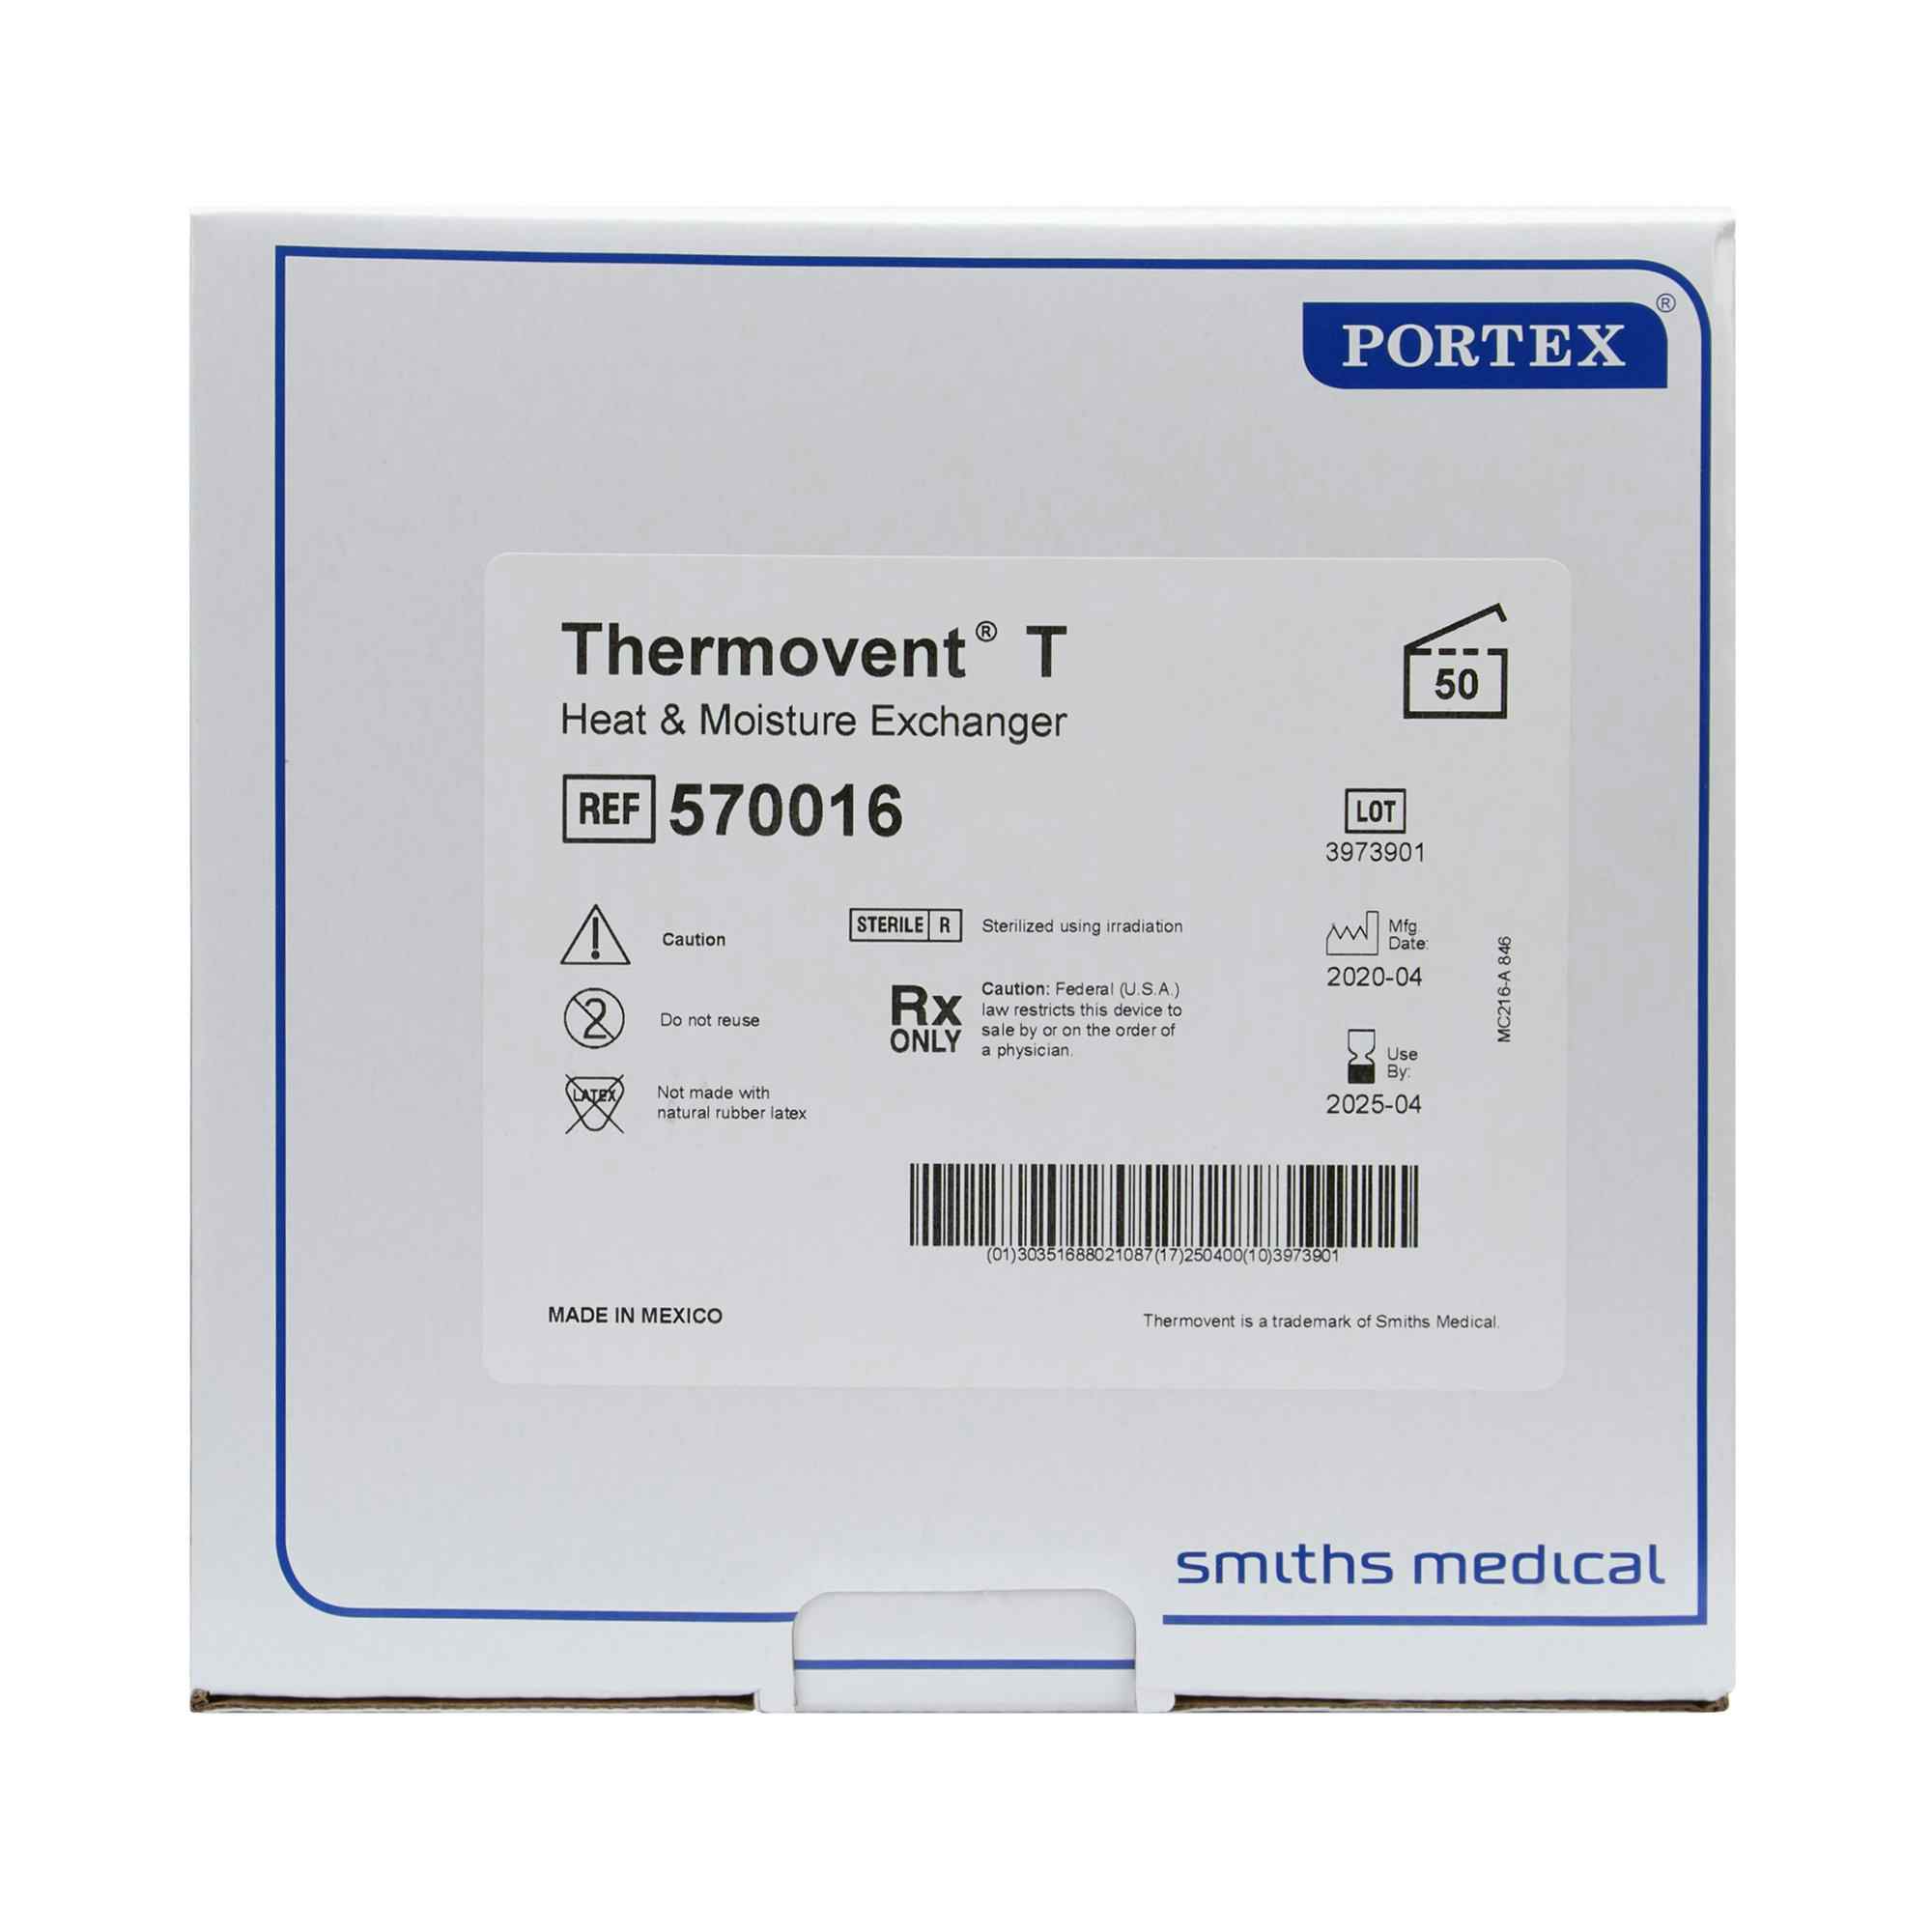 Thermovent T Heat and Moisture Exchanger